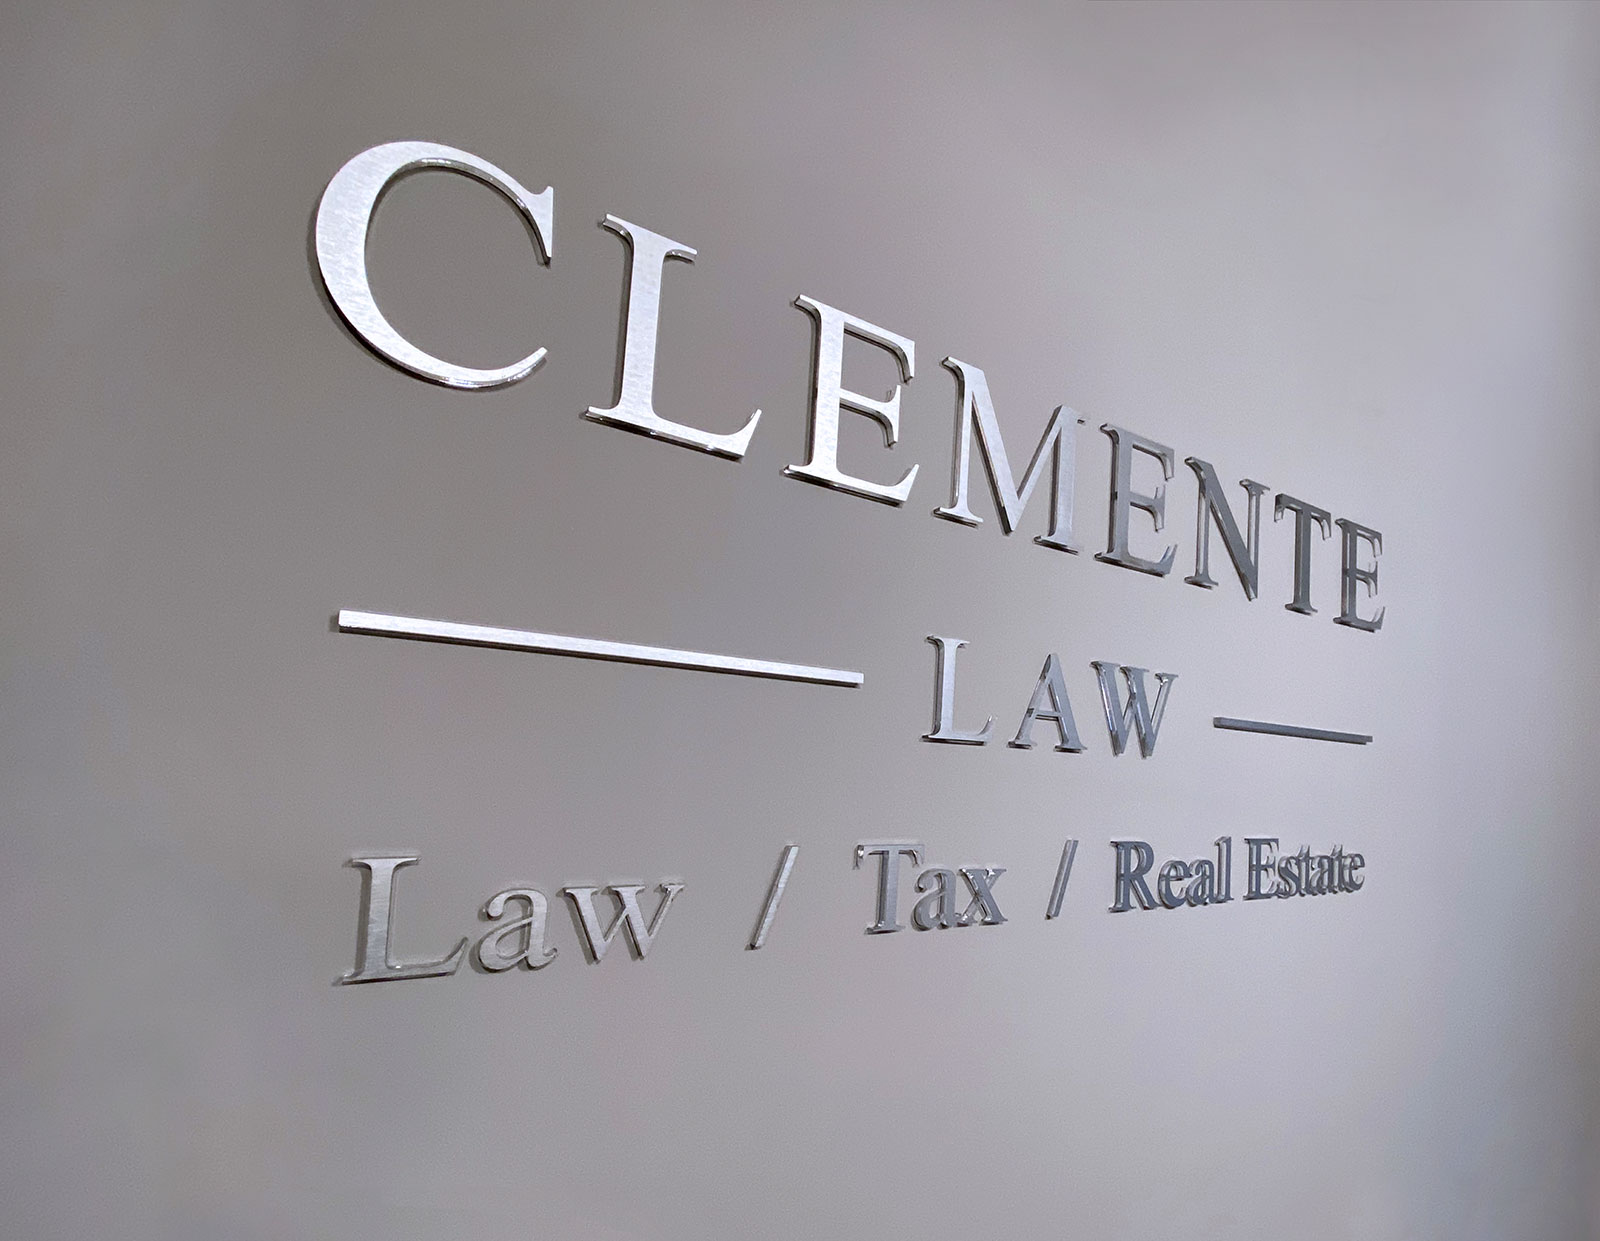 Clemente Law Firm Main Office